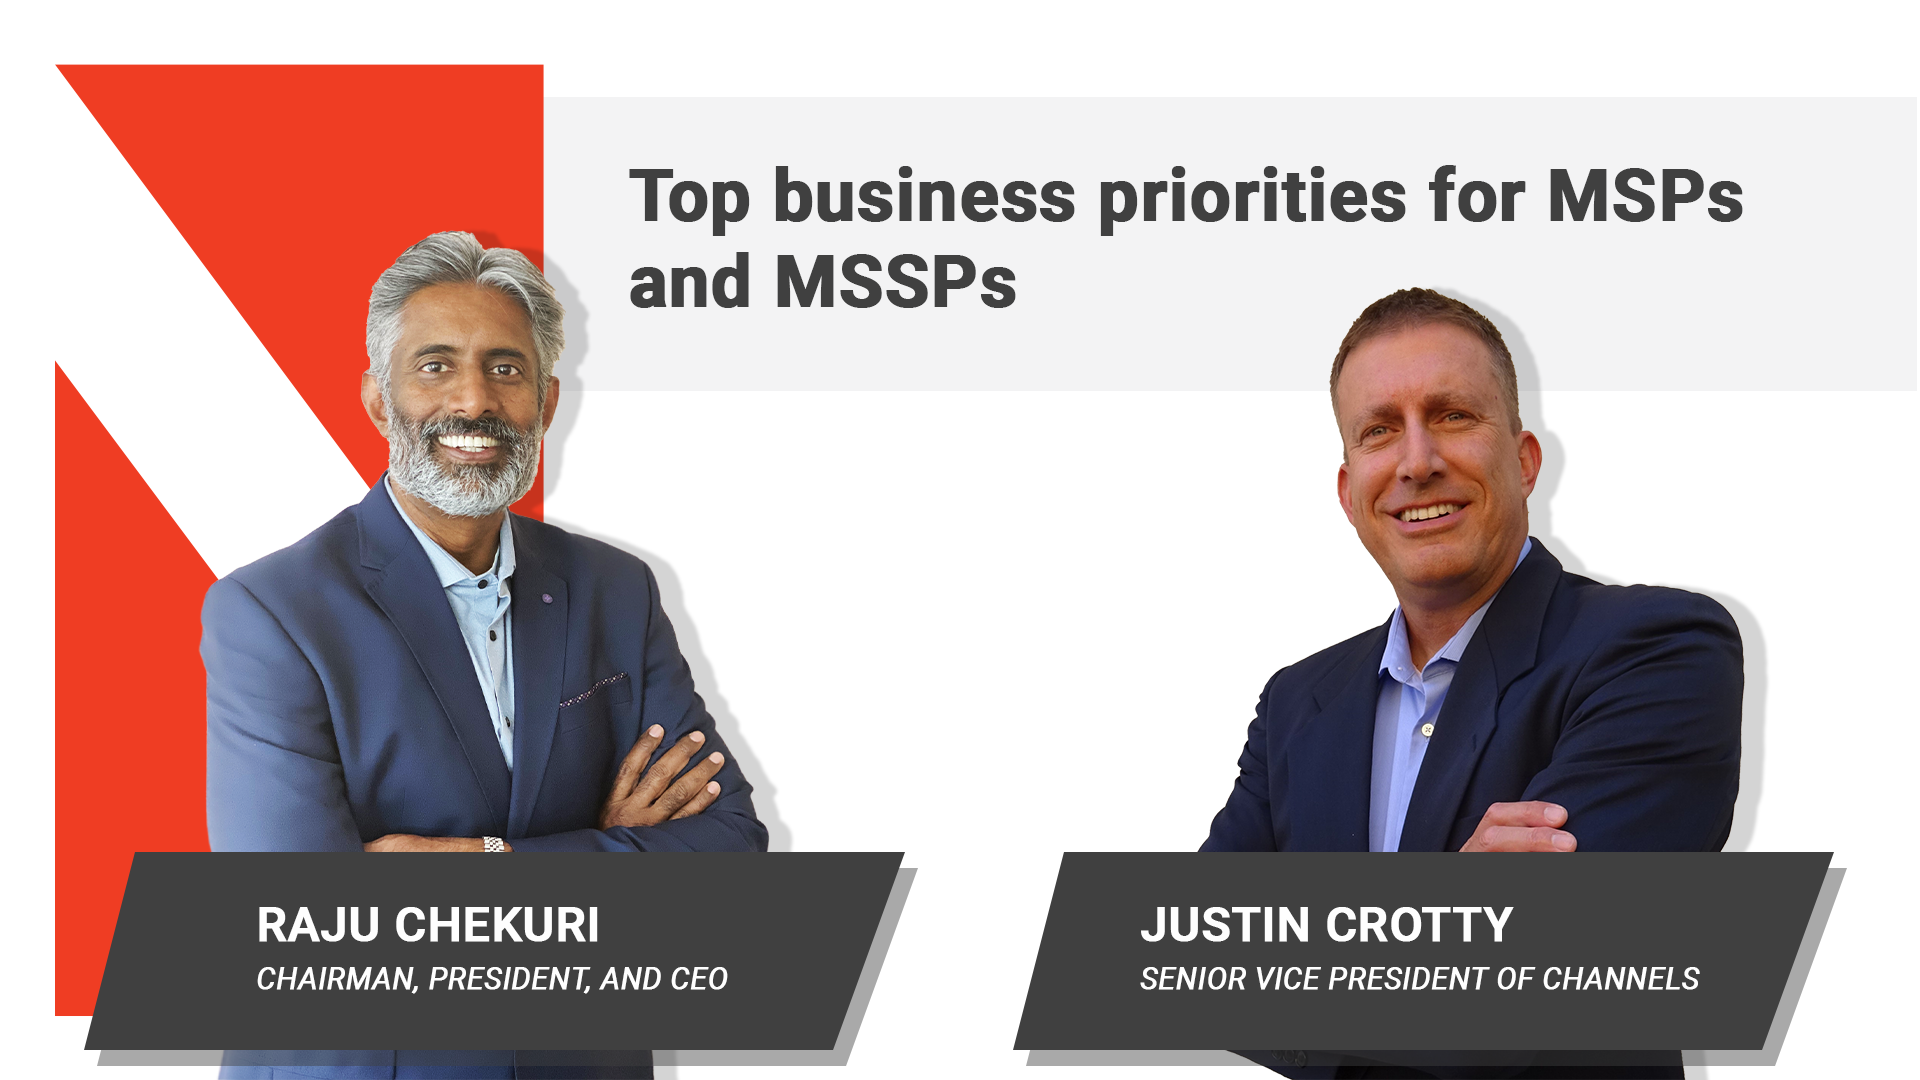 Top business priorities for Service Providers